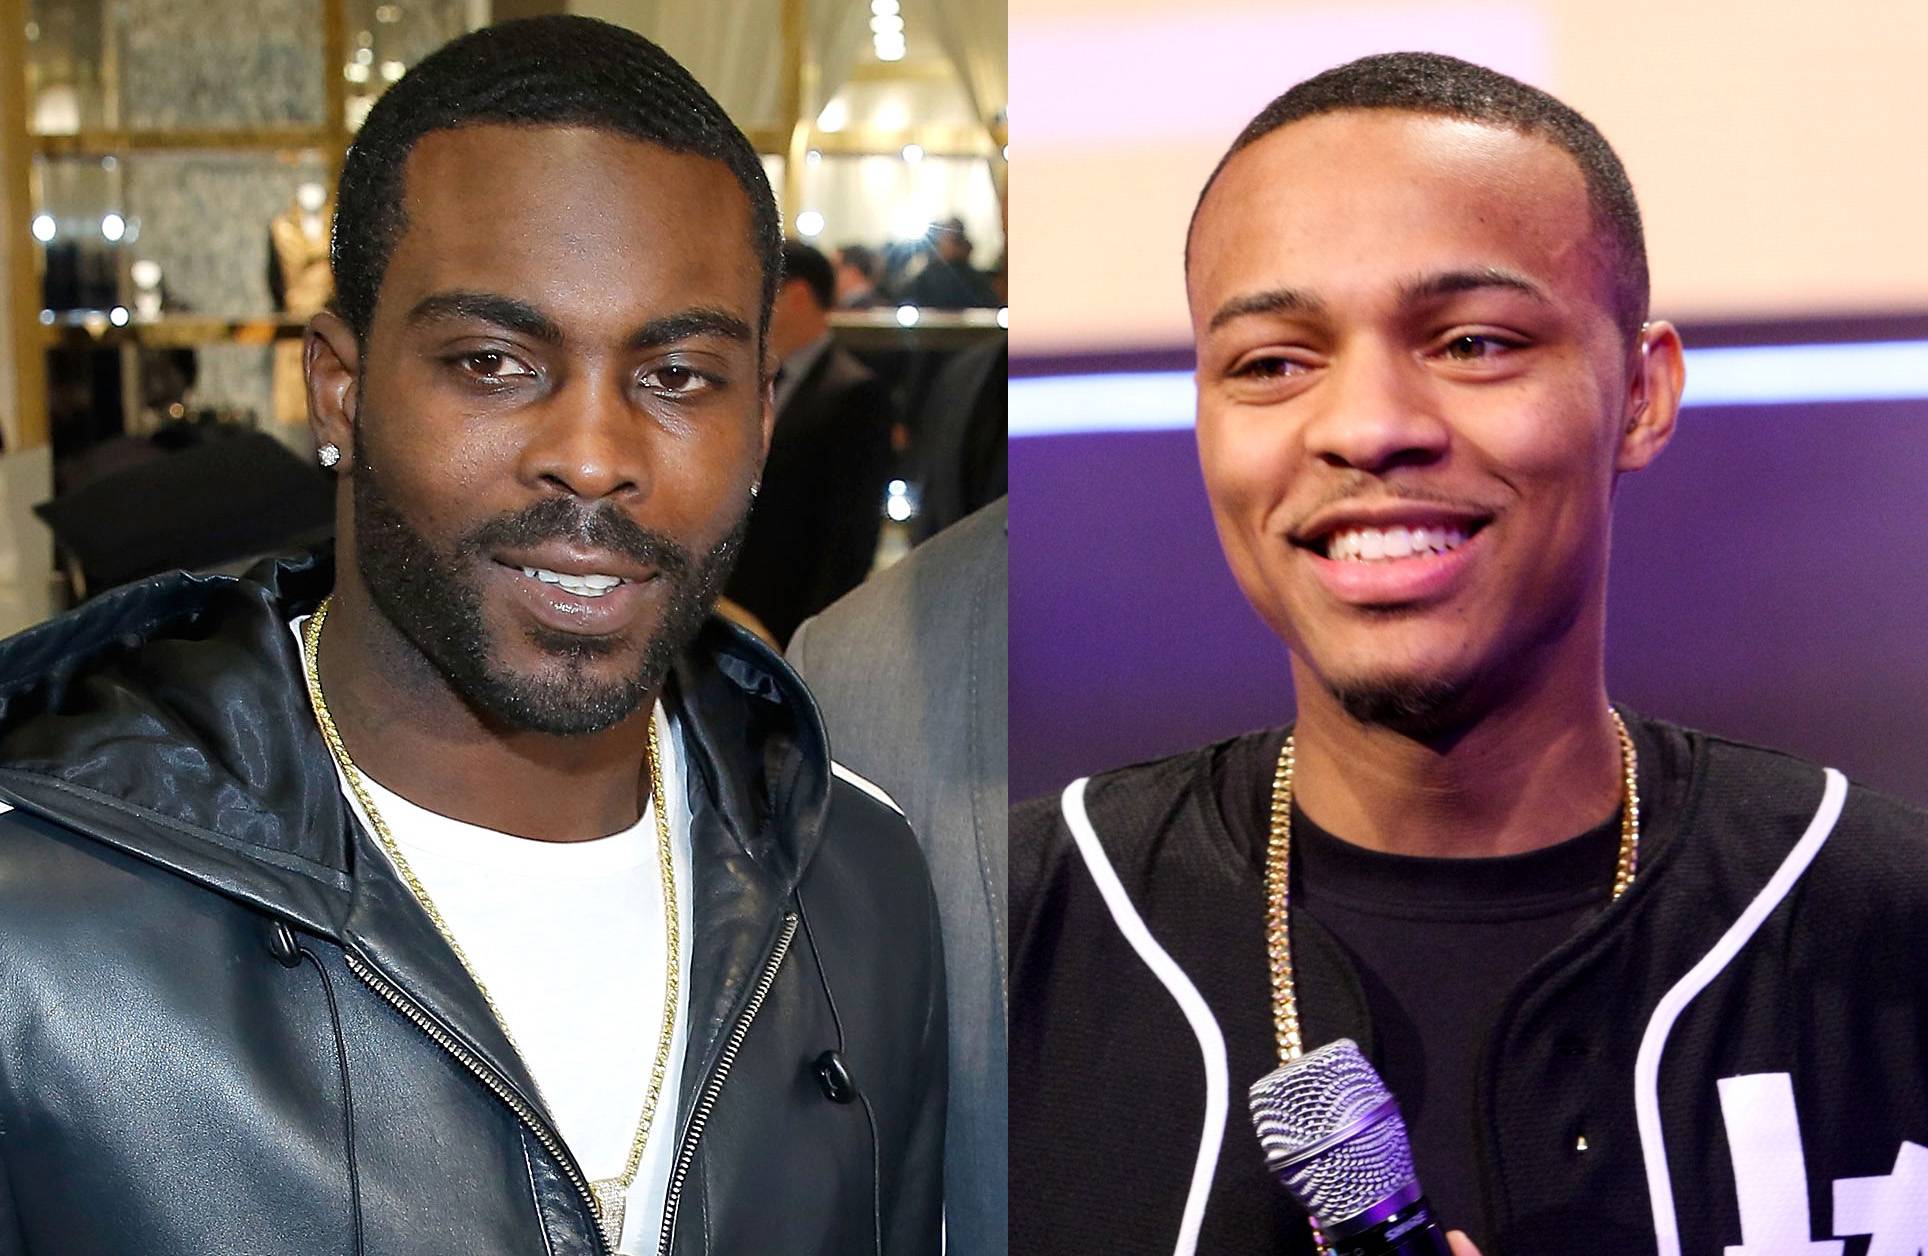 Michael Vick and Bow Wow Are Wave Masterz